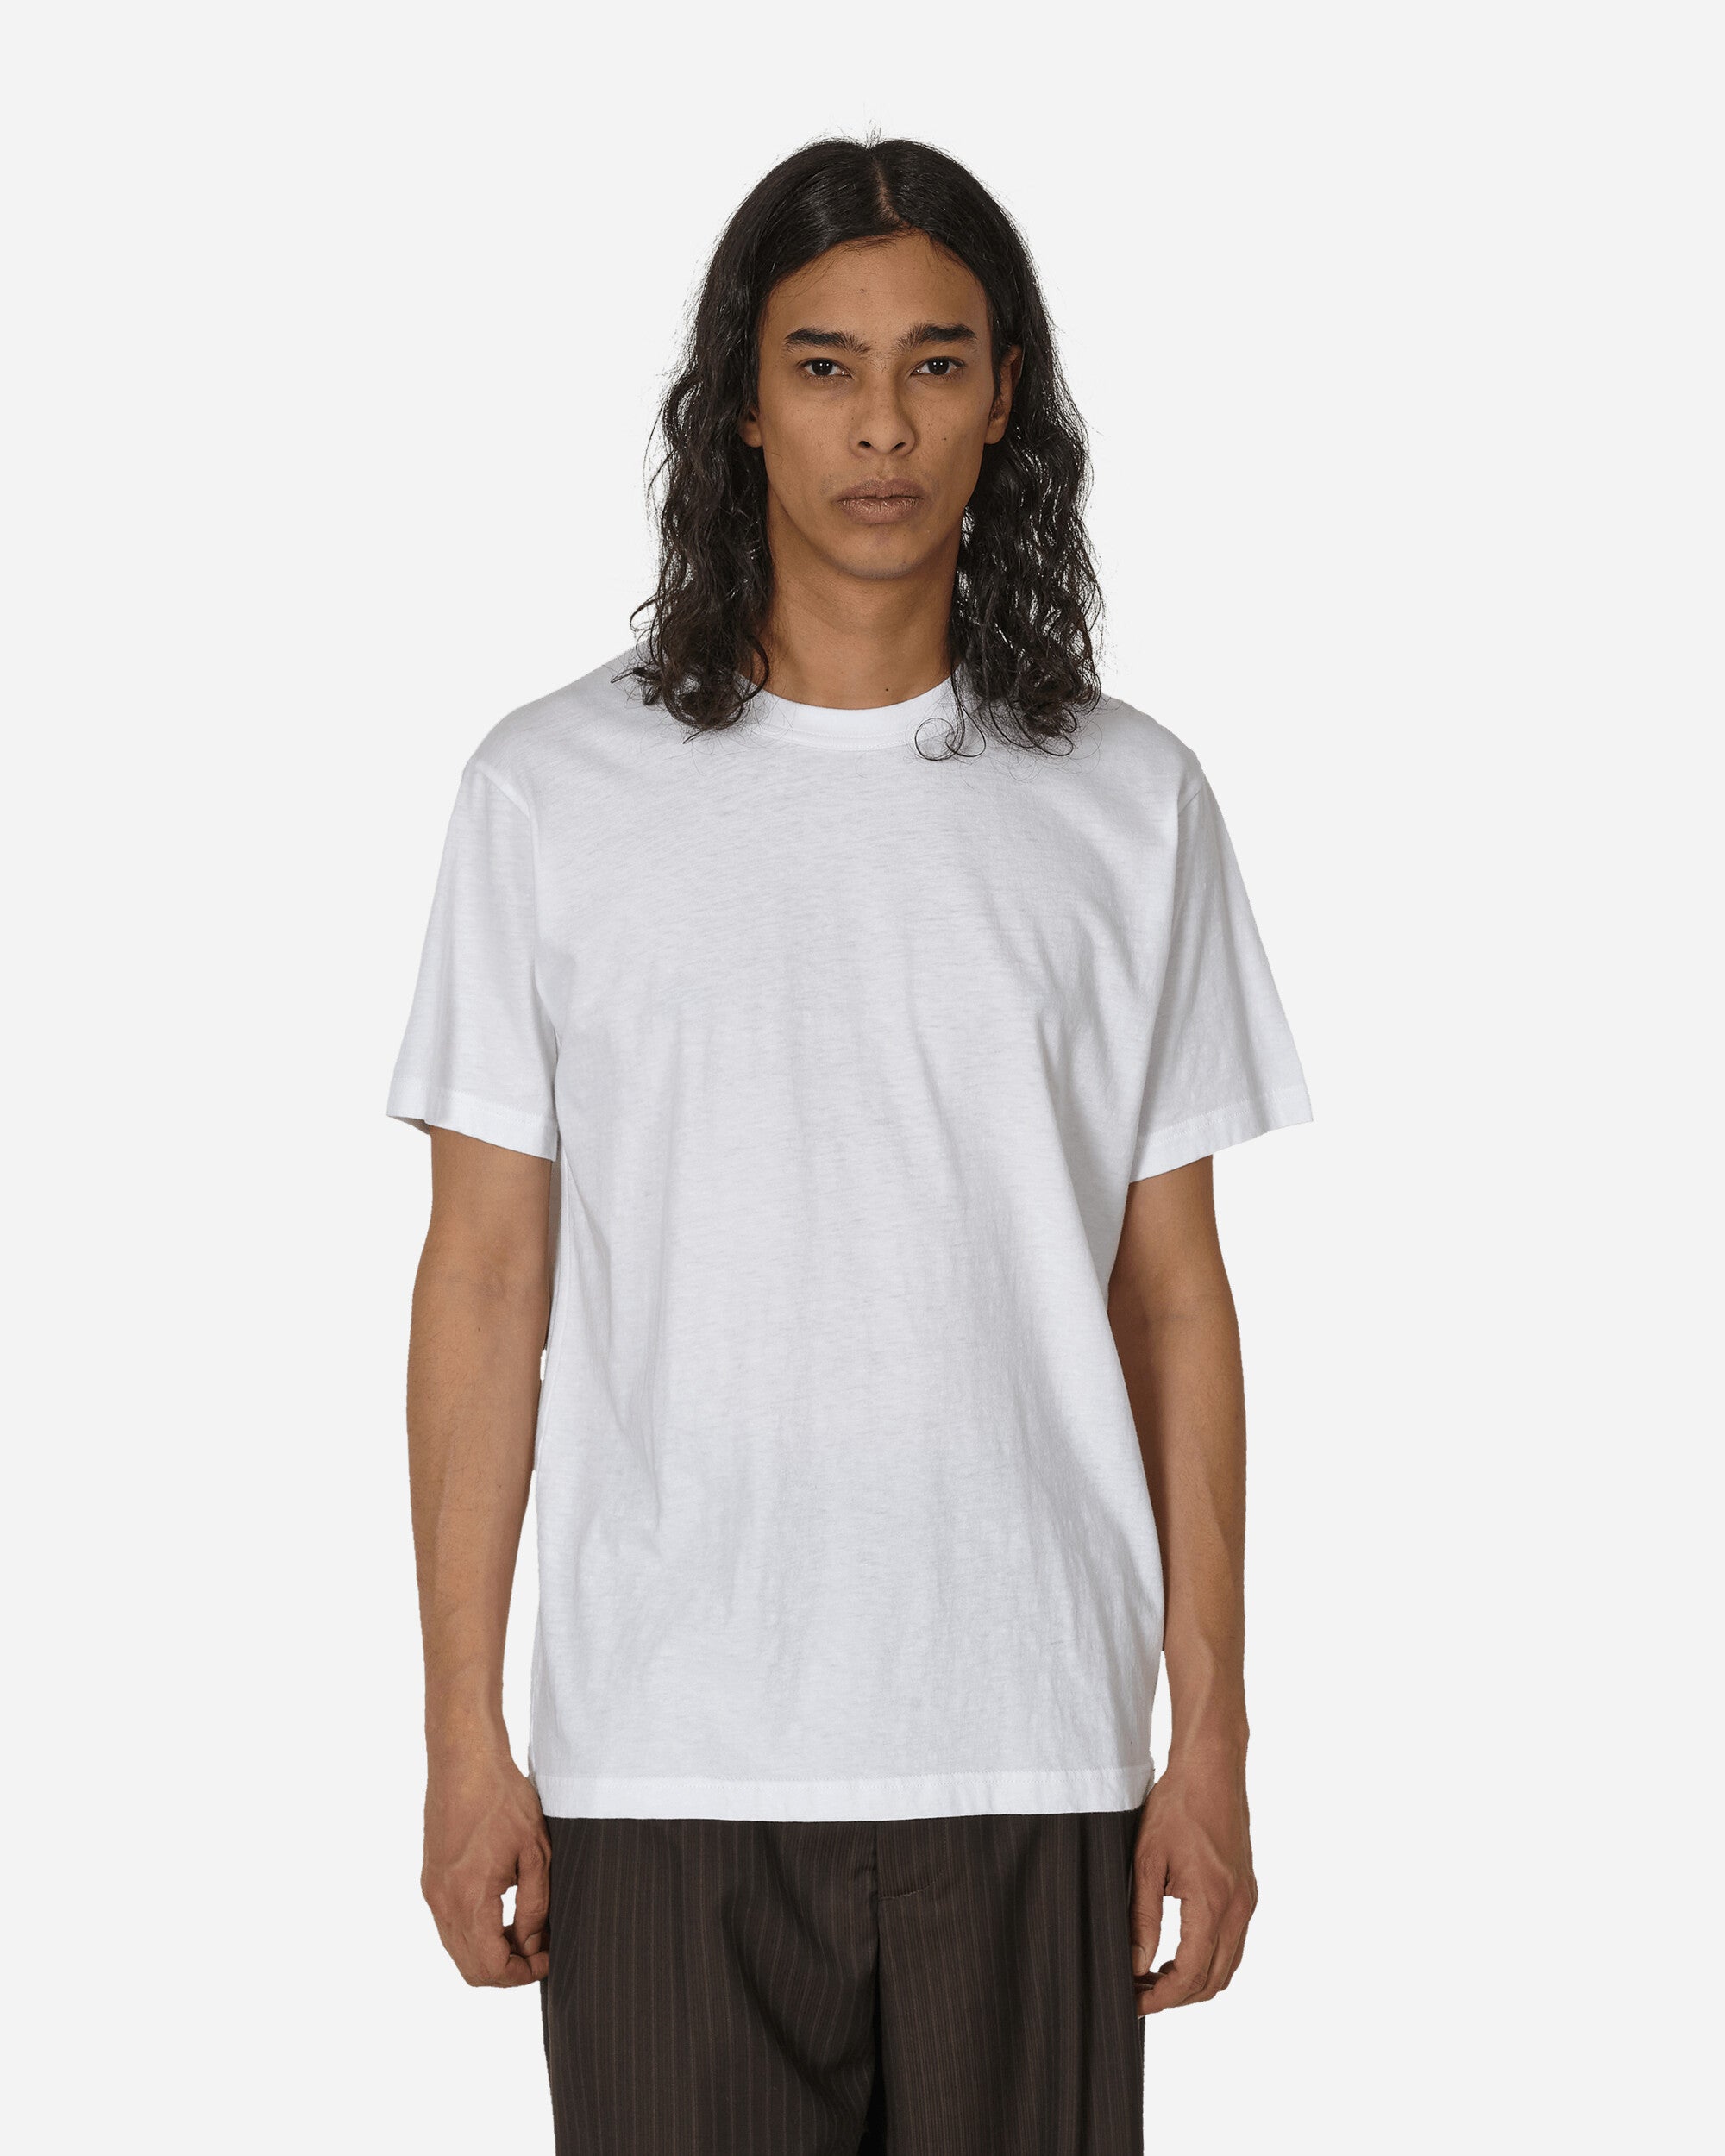 Sublig Wide 3-Pack T-Shirt White